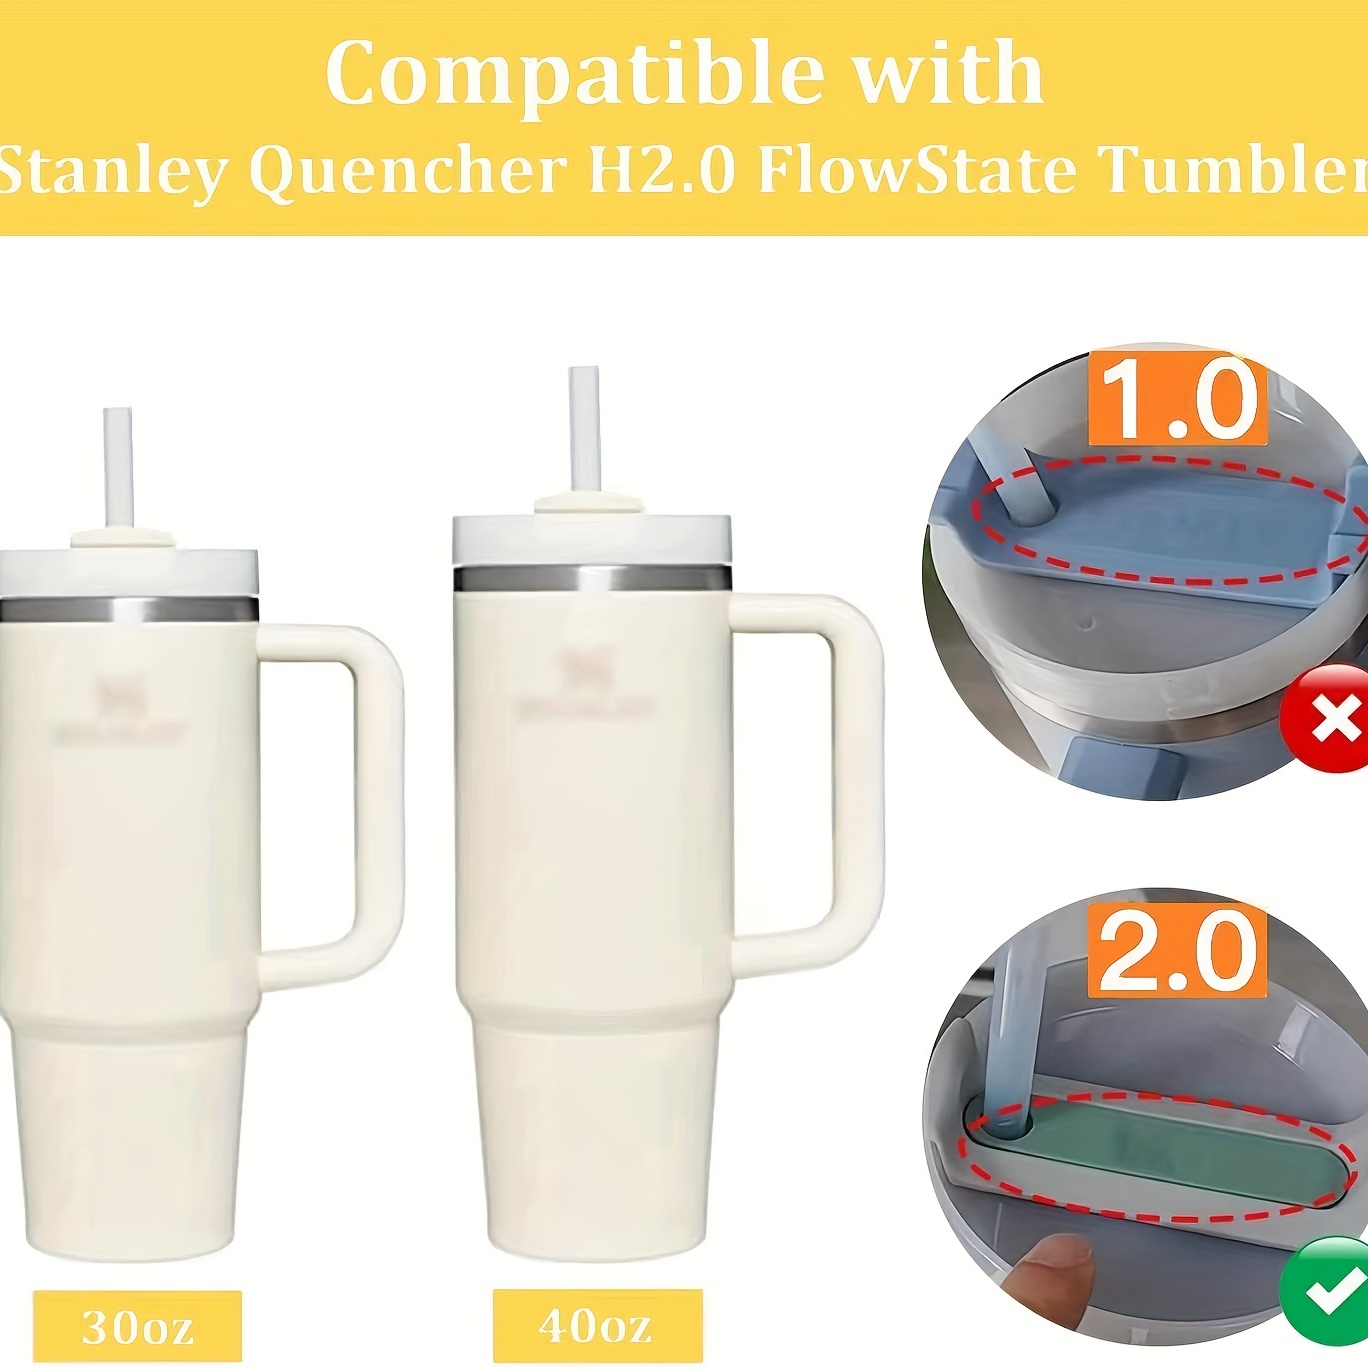 6pcs Spill Proof Stopper Set For Cup 2.0 40oz 30oz, With Accessories  Including Leak Proof Stopper, Straw Cover, Lid Spill Plug, Compatible With  Universal 1.0 And 2.0 Tumbler (clear)